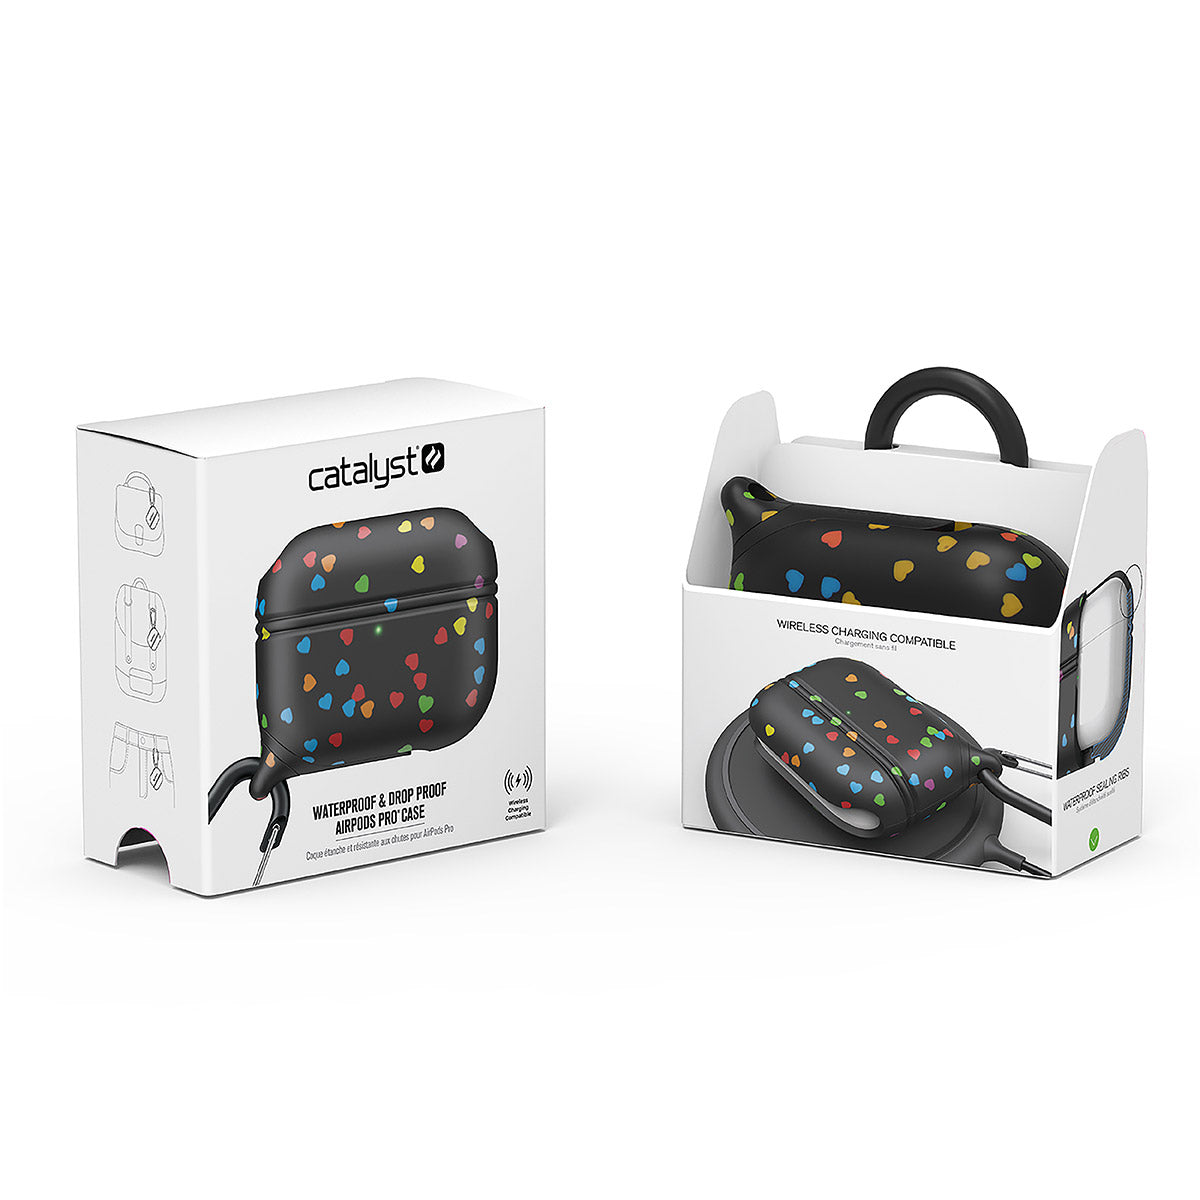 CATAPLAPDPROHTB | catalyst airpods pro gen 2 1 waterproof case carabiner special edition black with hearts packaging